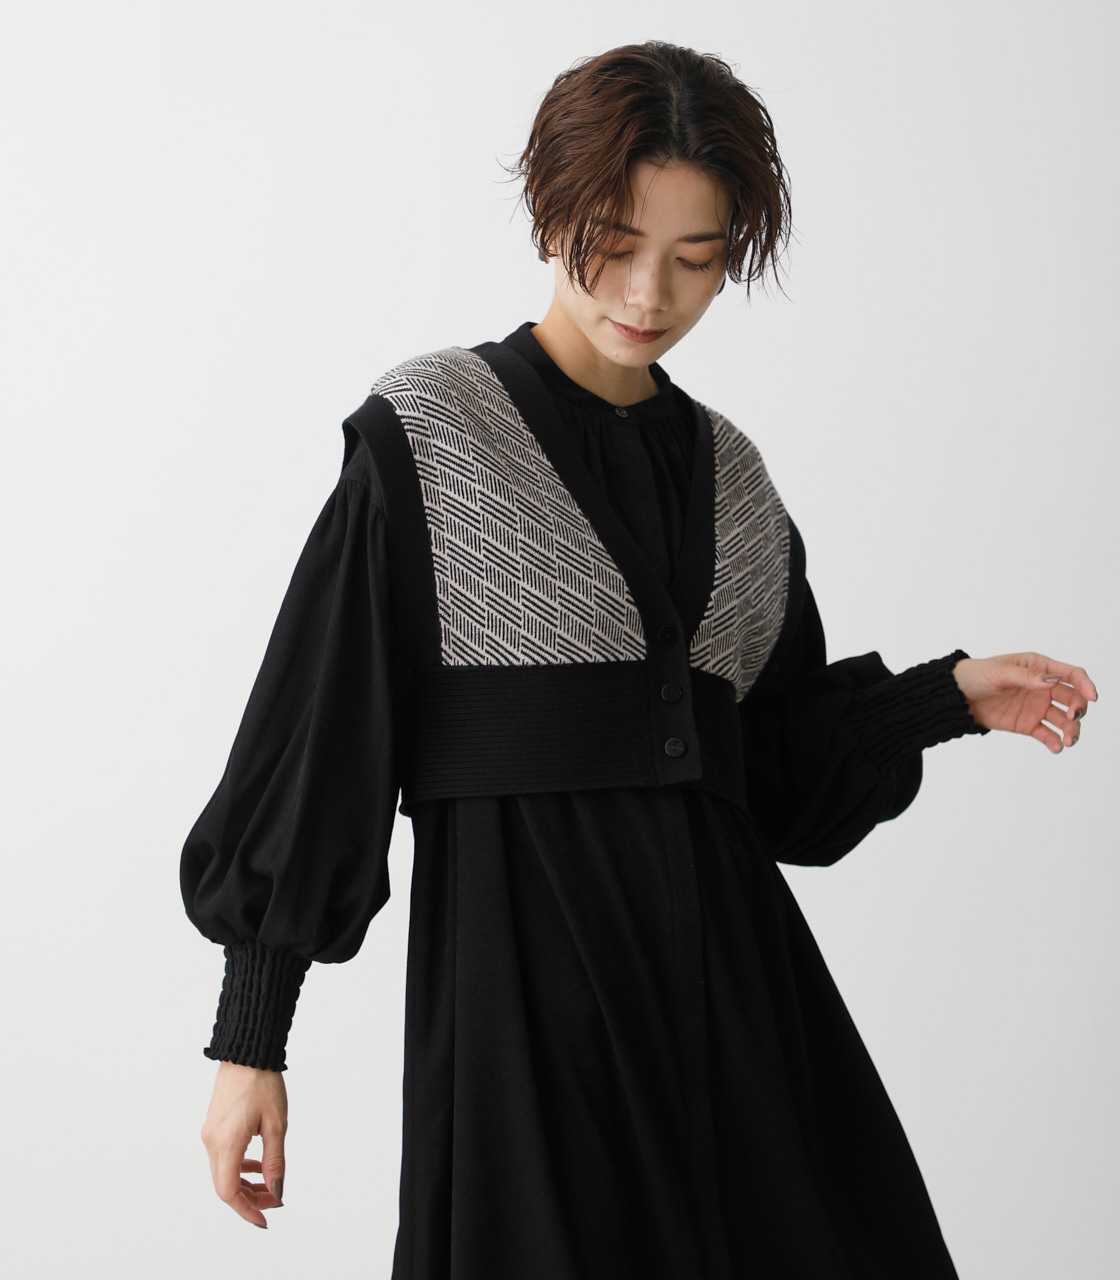 PATTERN COMPACT KNIT VEST/パターンコンパクトニットベスト 詳細画像 柄BLK 2